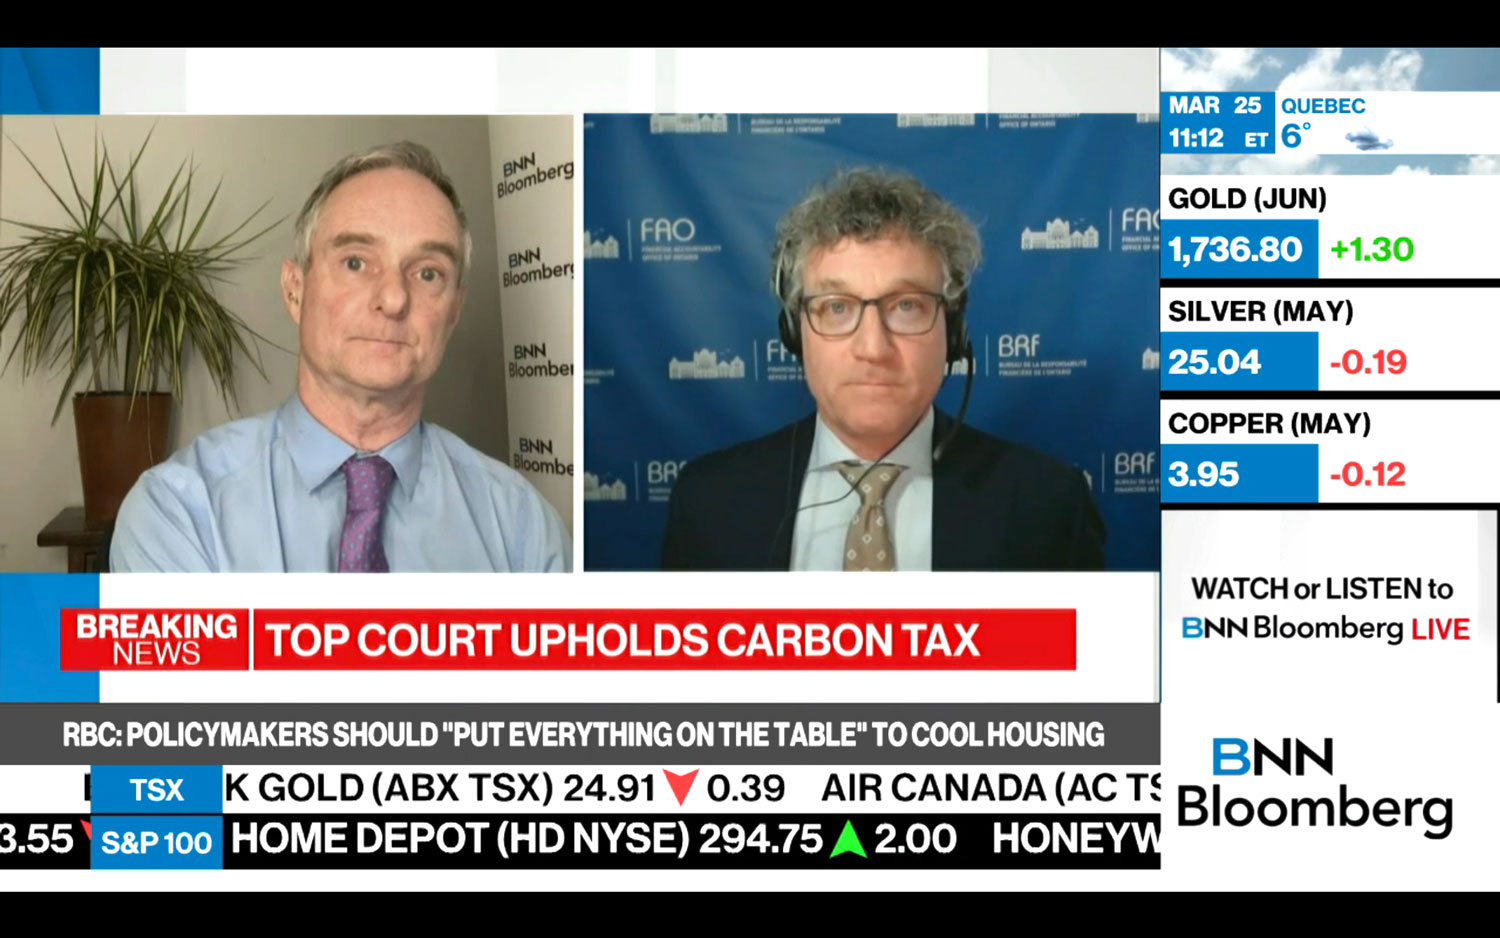 Peter Weltman on BNN Bloomberg's Breaking News with Andrew Bell.